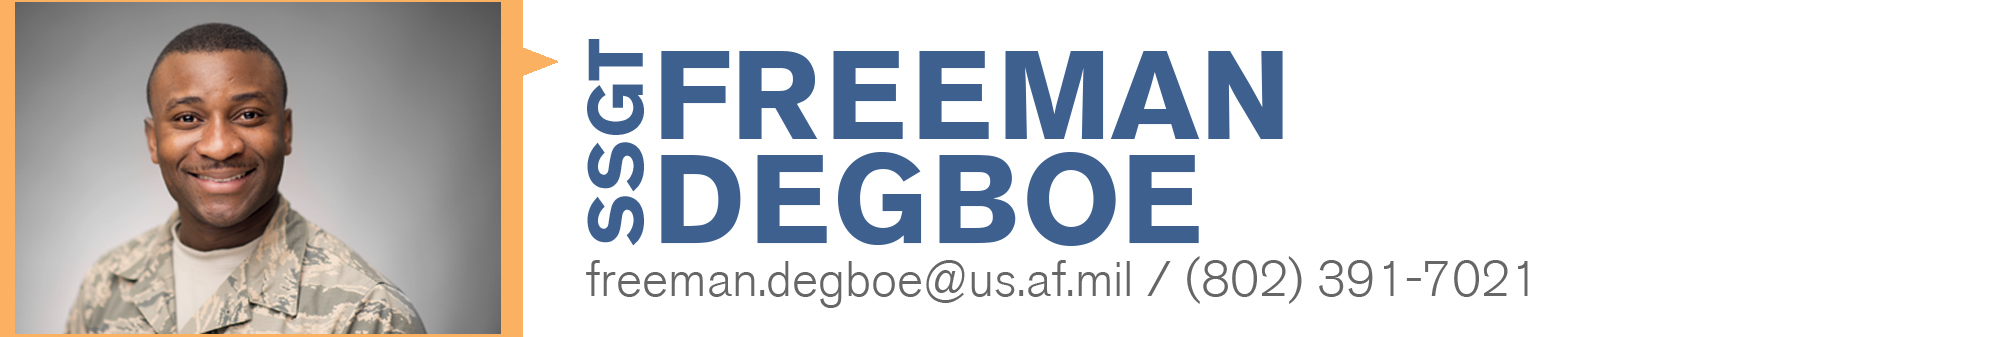 Contact information for Degboe